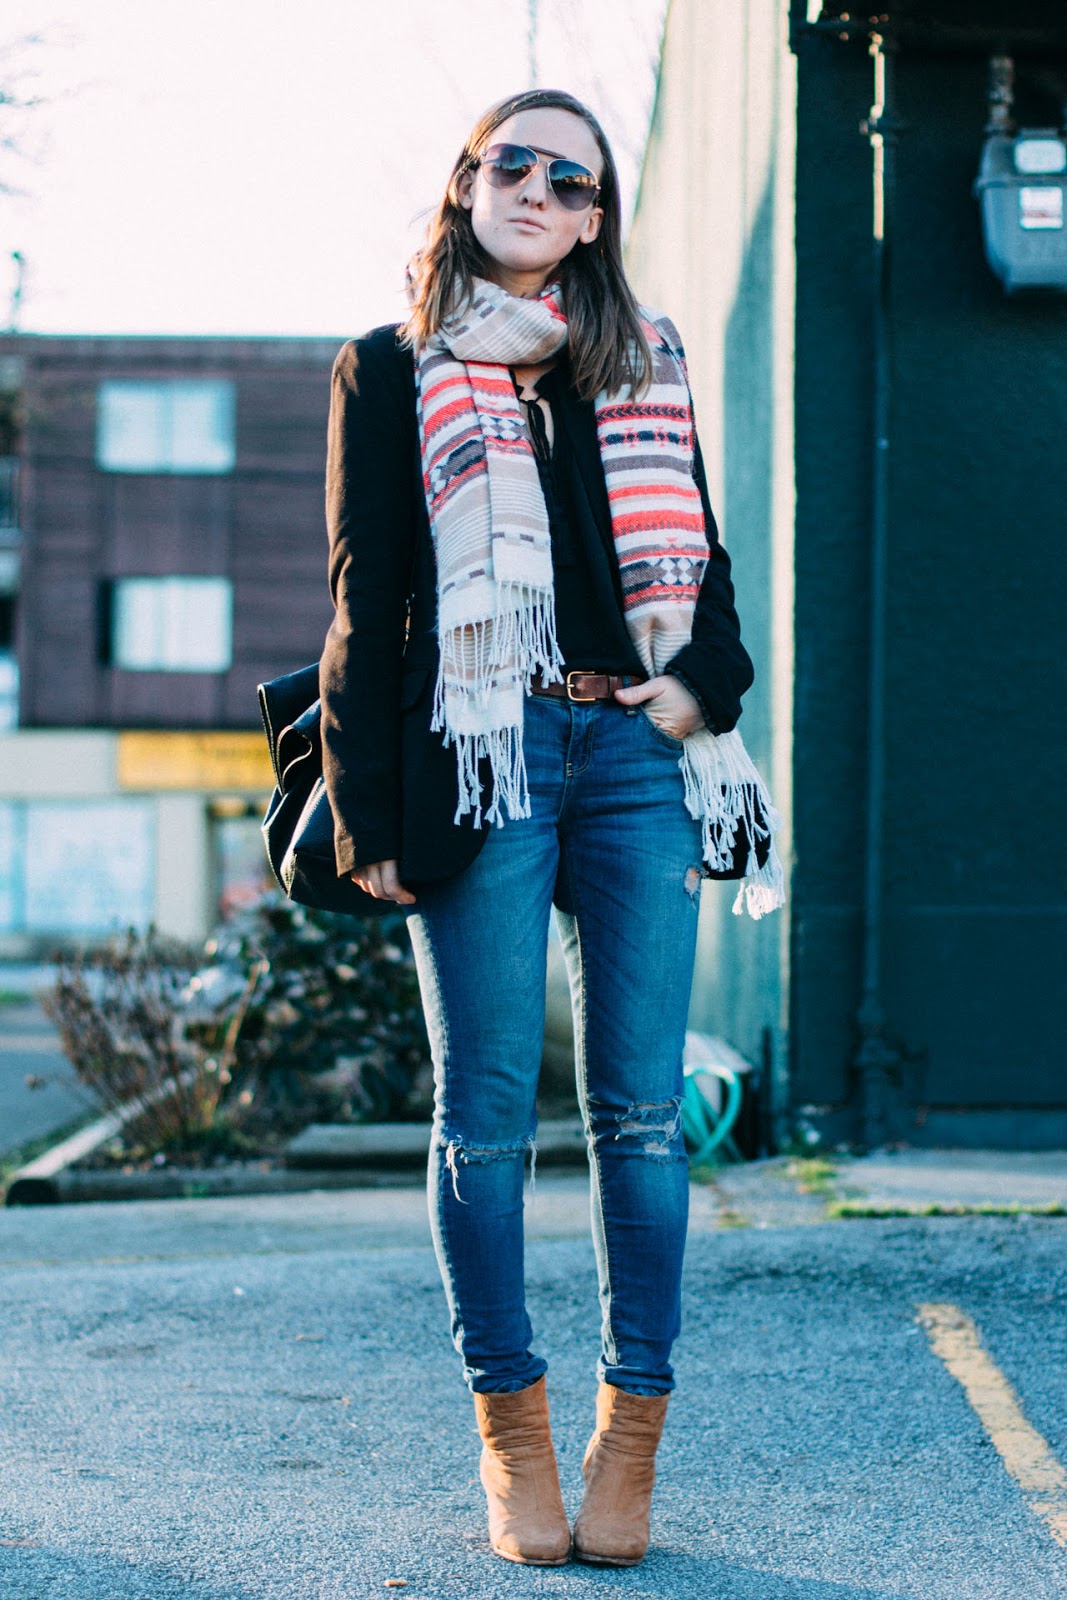 In My Dreams - Vancouver Fashion and Personal Style Blog: Winter Sun